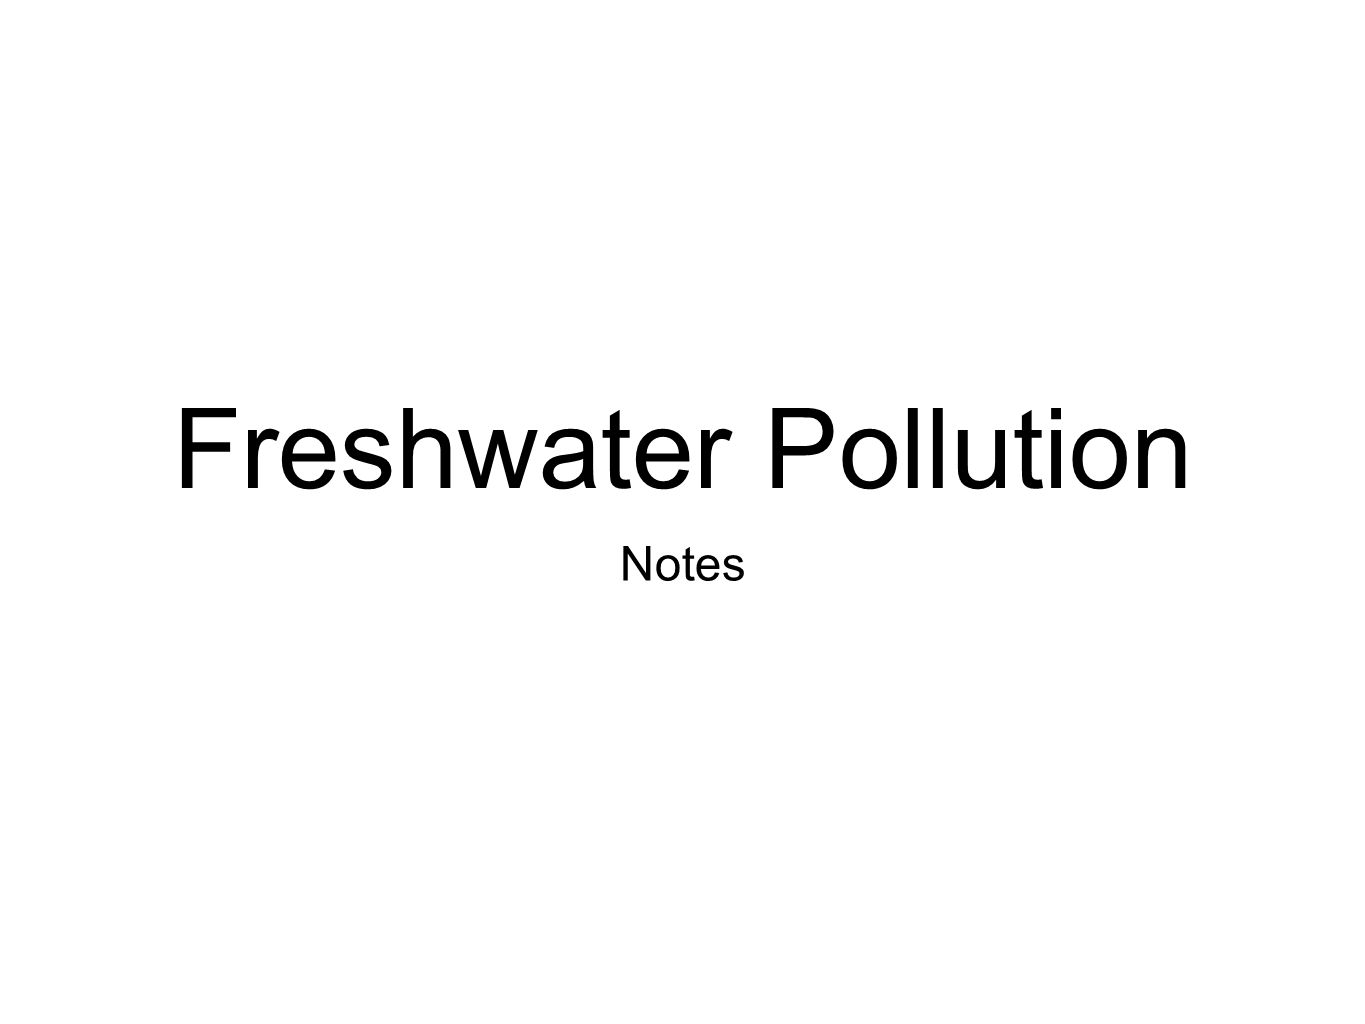 Freshwater Pollution Notes